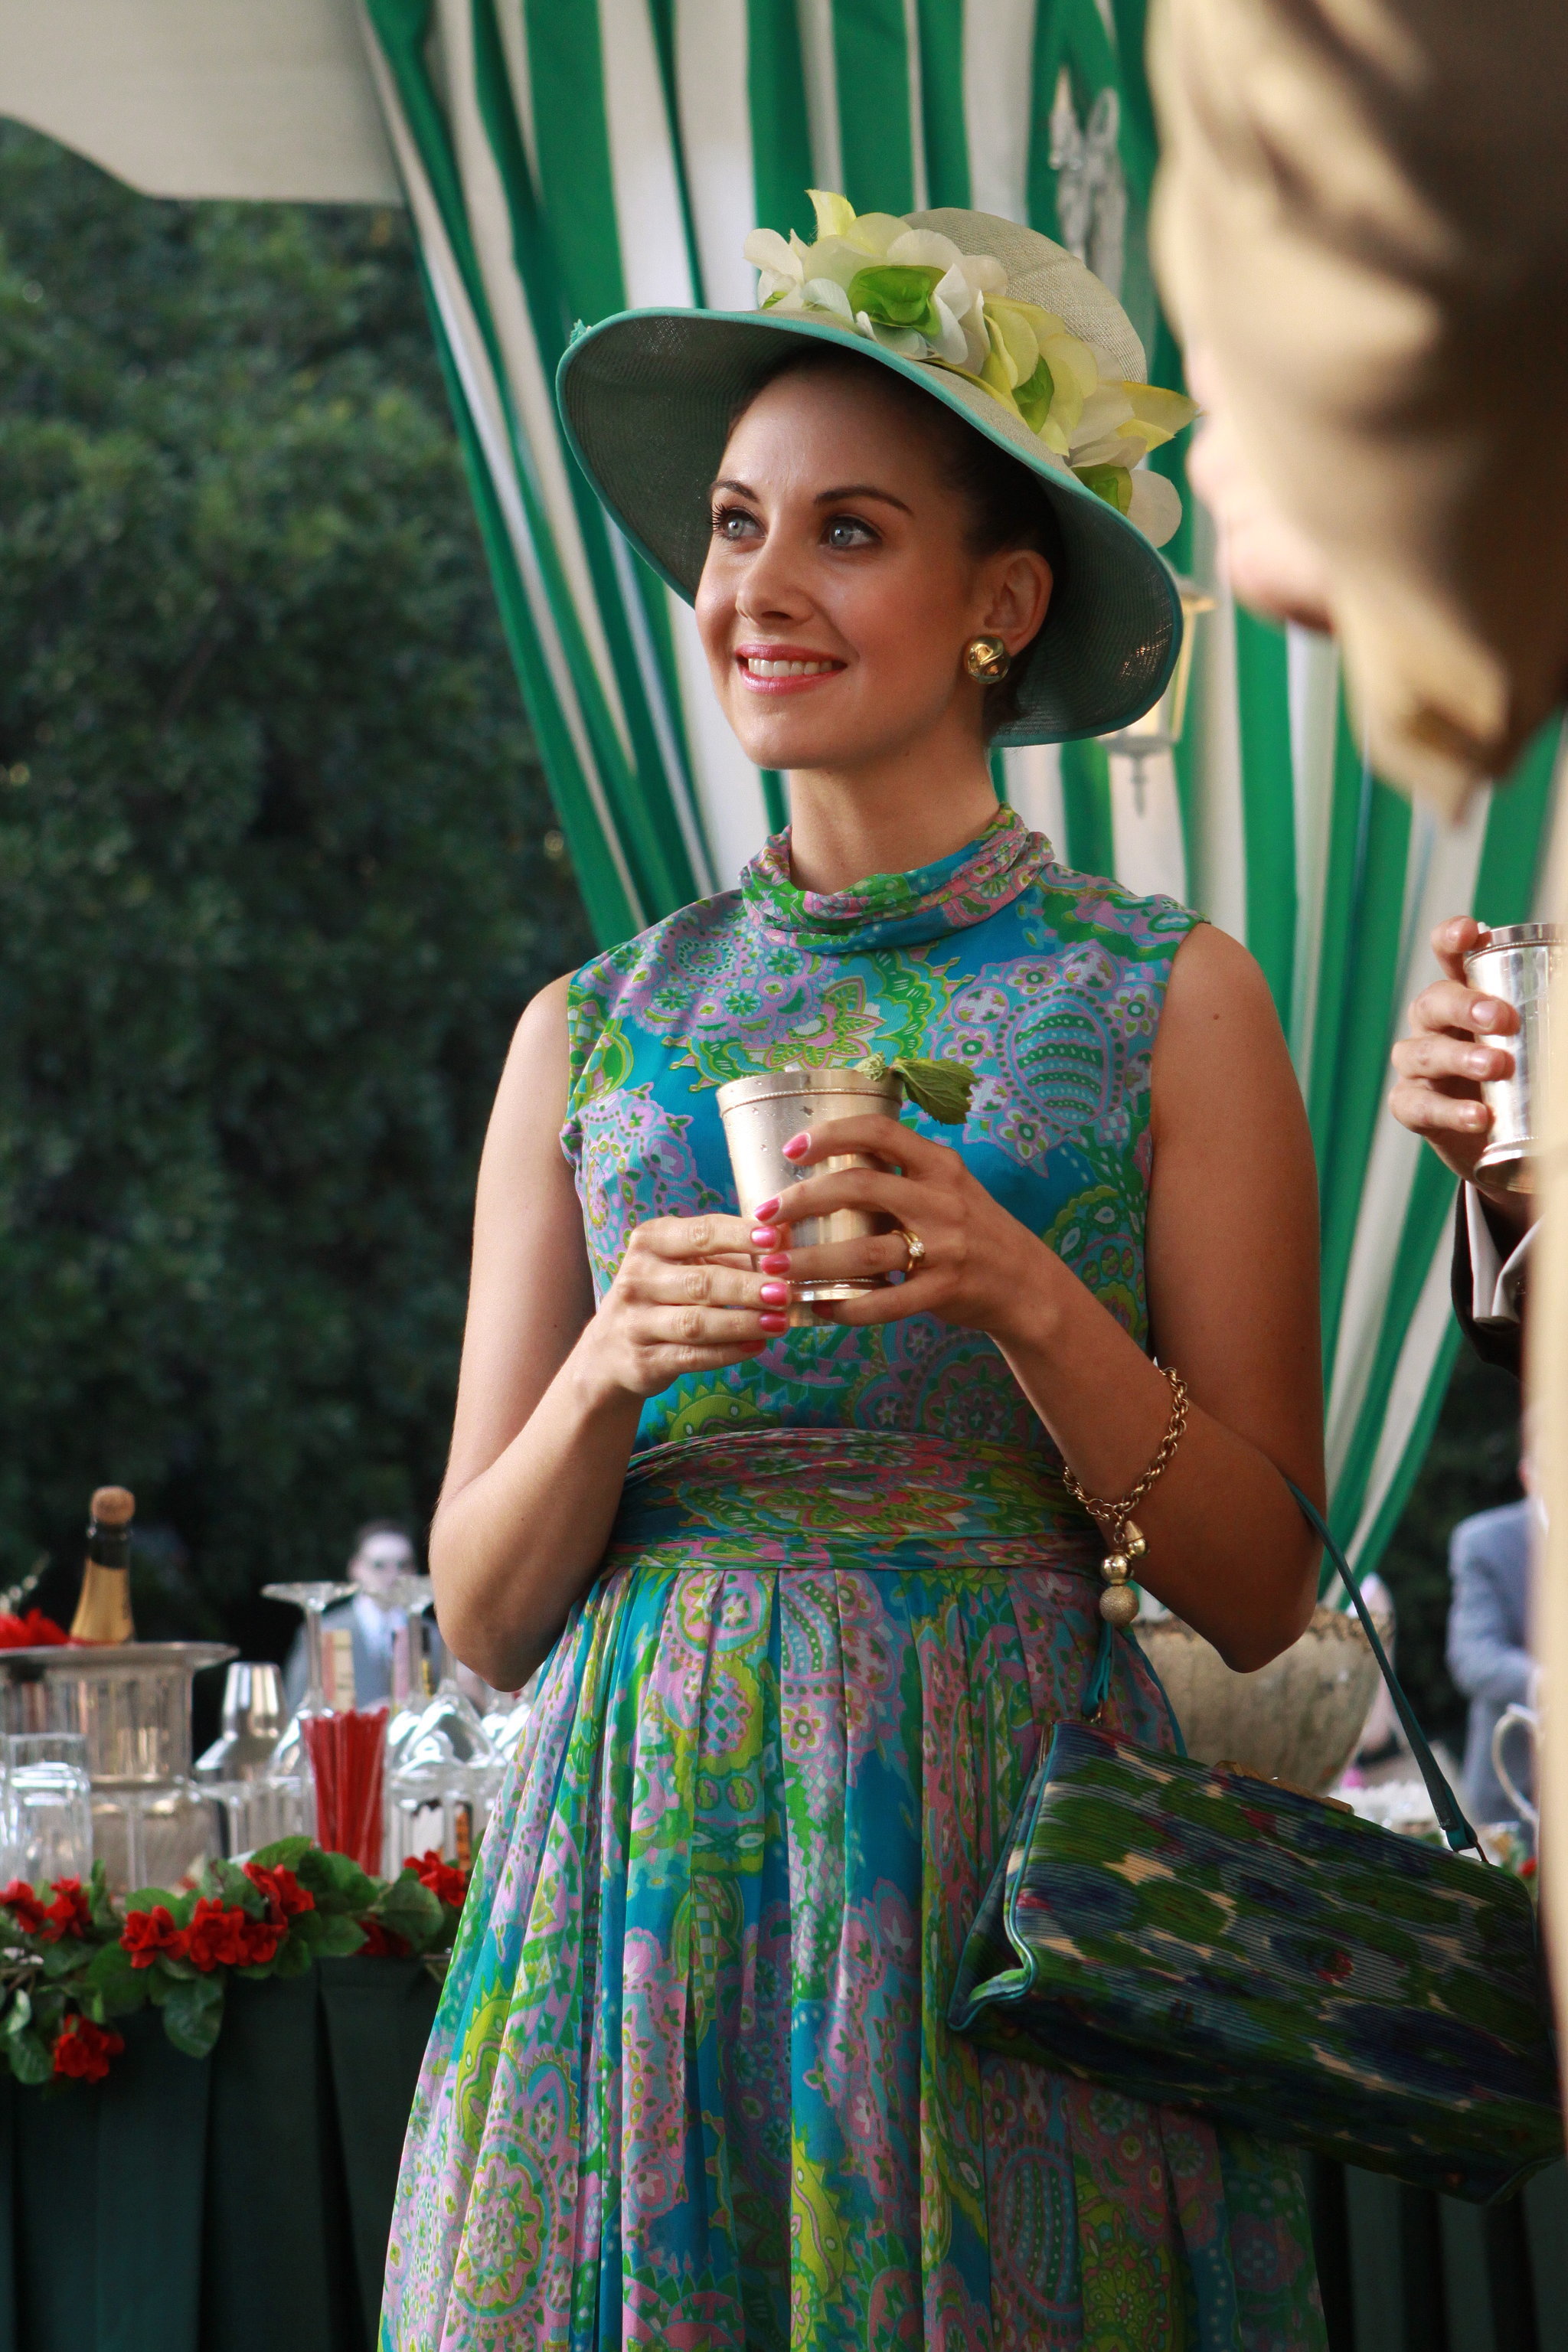 Trudy's Kentucky Derby Dress The Mad Men Costumes True Fans Are Still